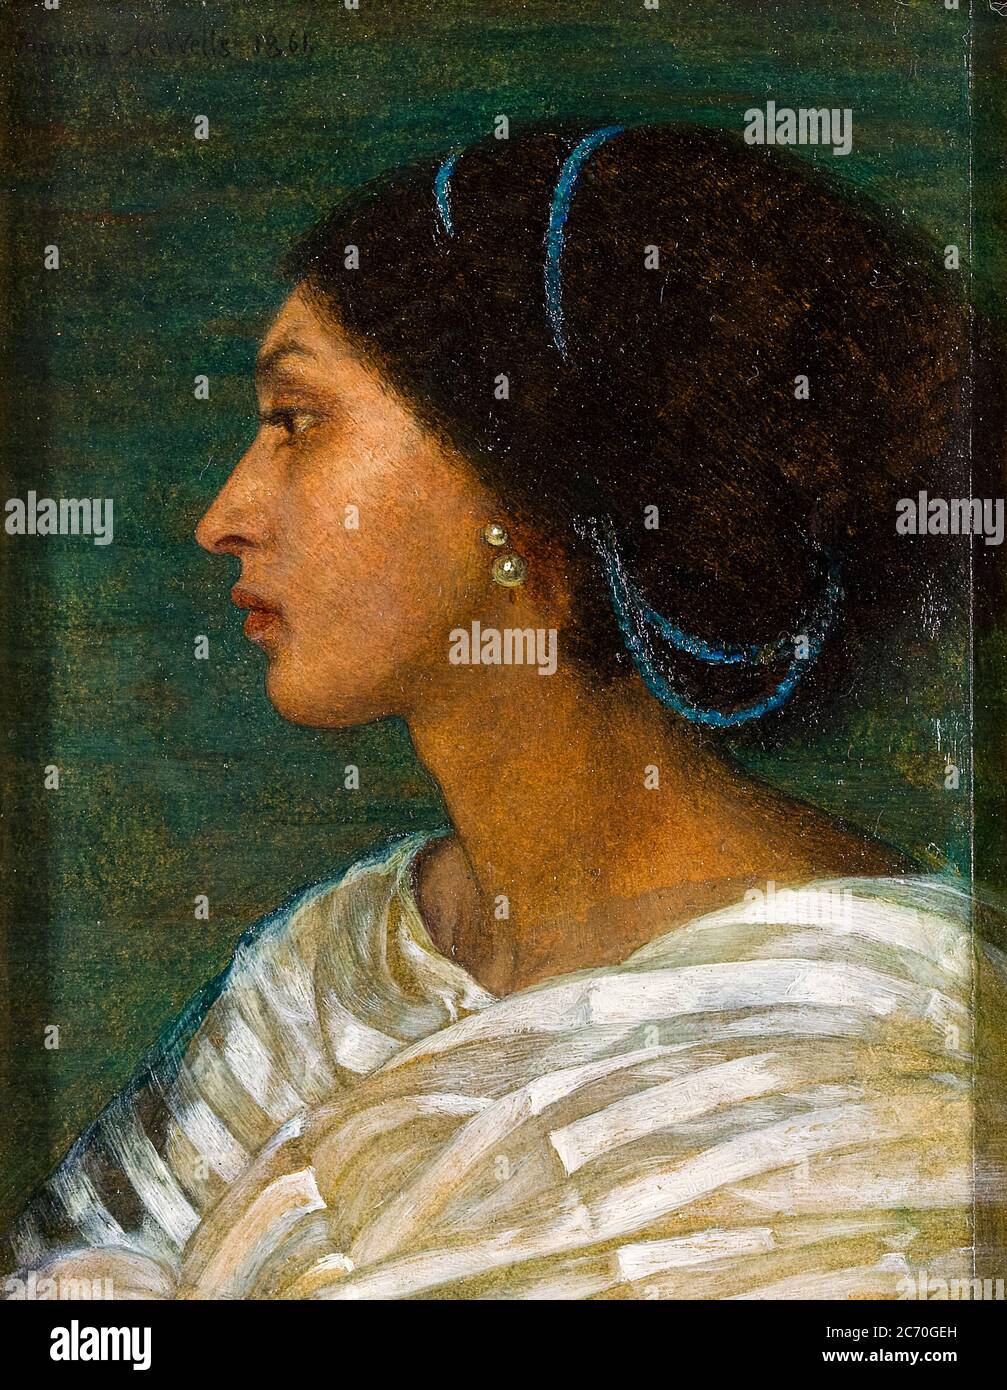 Fanny Eaton (1835-1924), Jamaican-born, artist's model, known for her work with the Pre-Raphaelite Brotherhood, portrait painting by Joanna Mary Boyce, 1861 Stock Photo